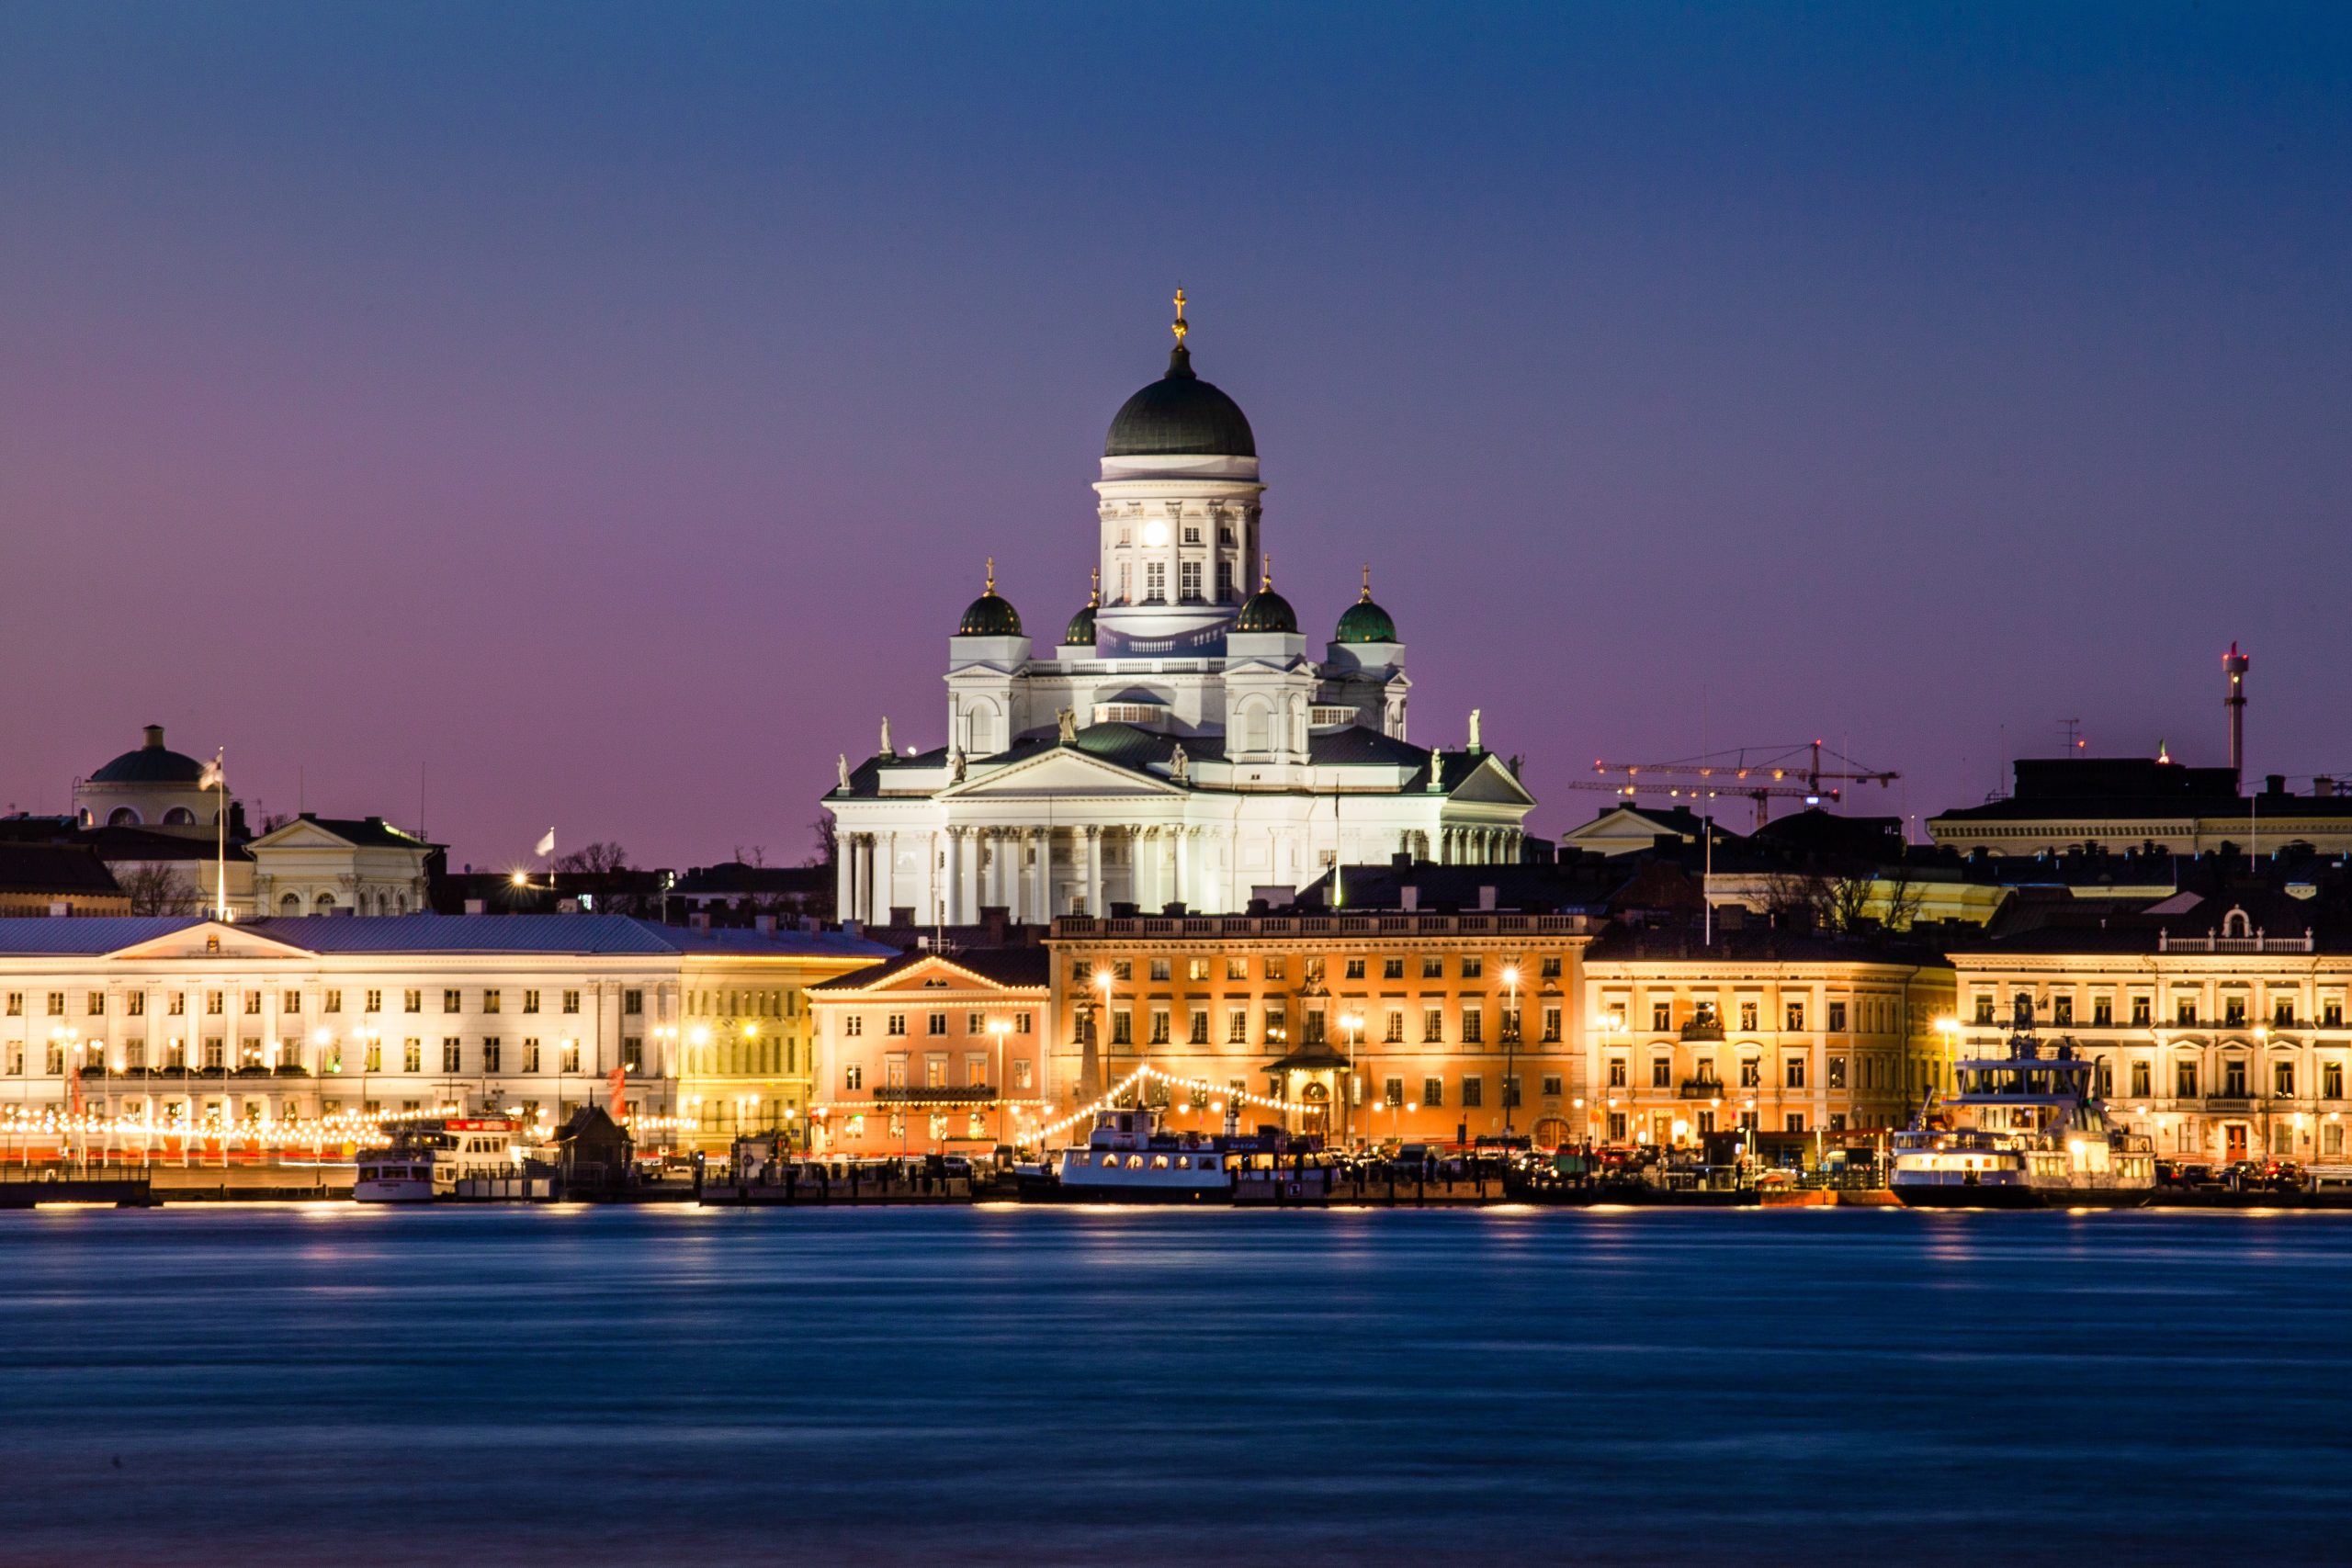 A church and buildings are lit up at night in Helsinki.